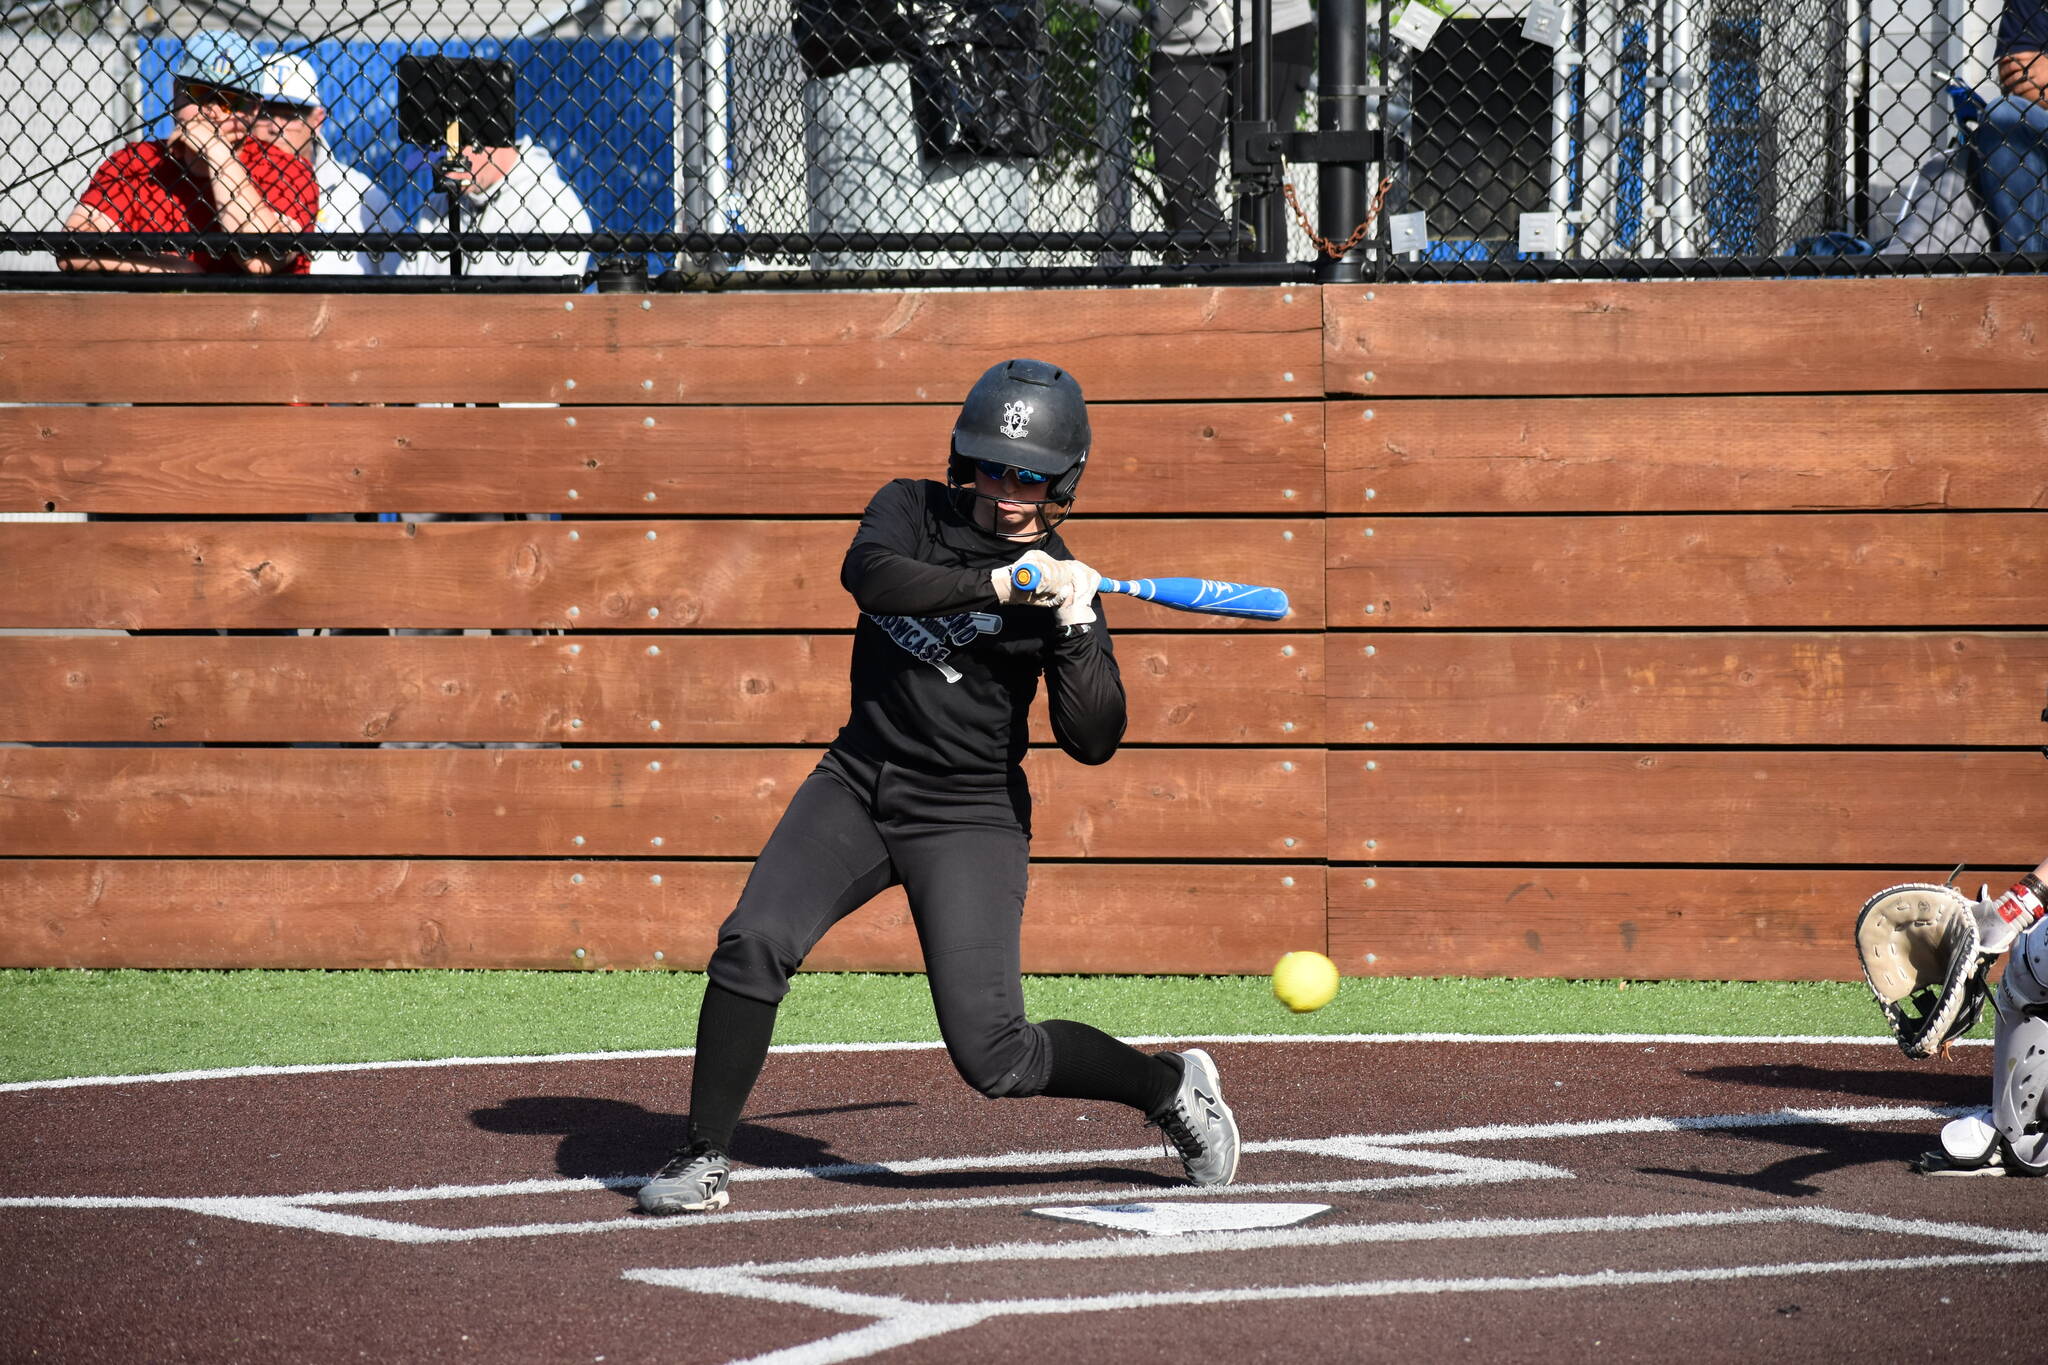 Kentwood utility player CJ Larson takes a ball in her at bat in the All-Star game. Ben Ray / The Reporter